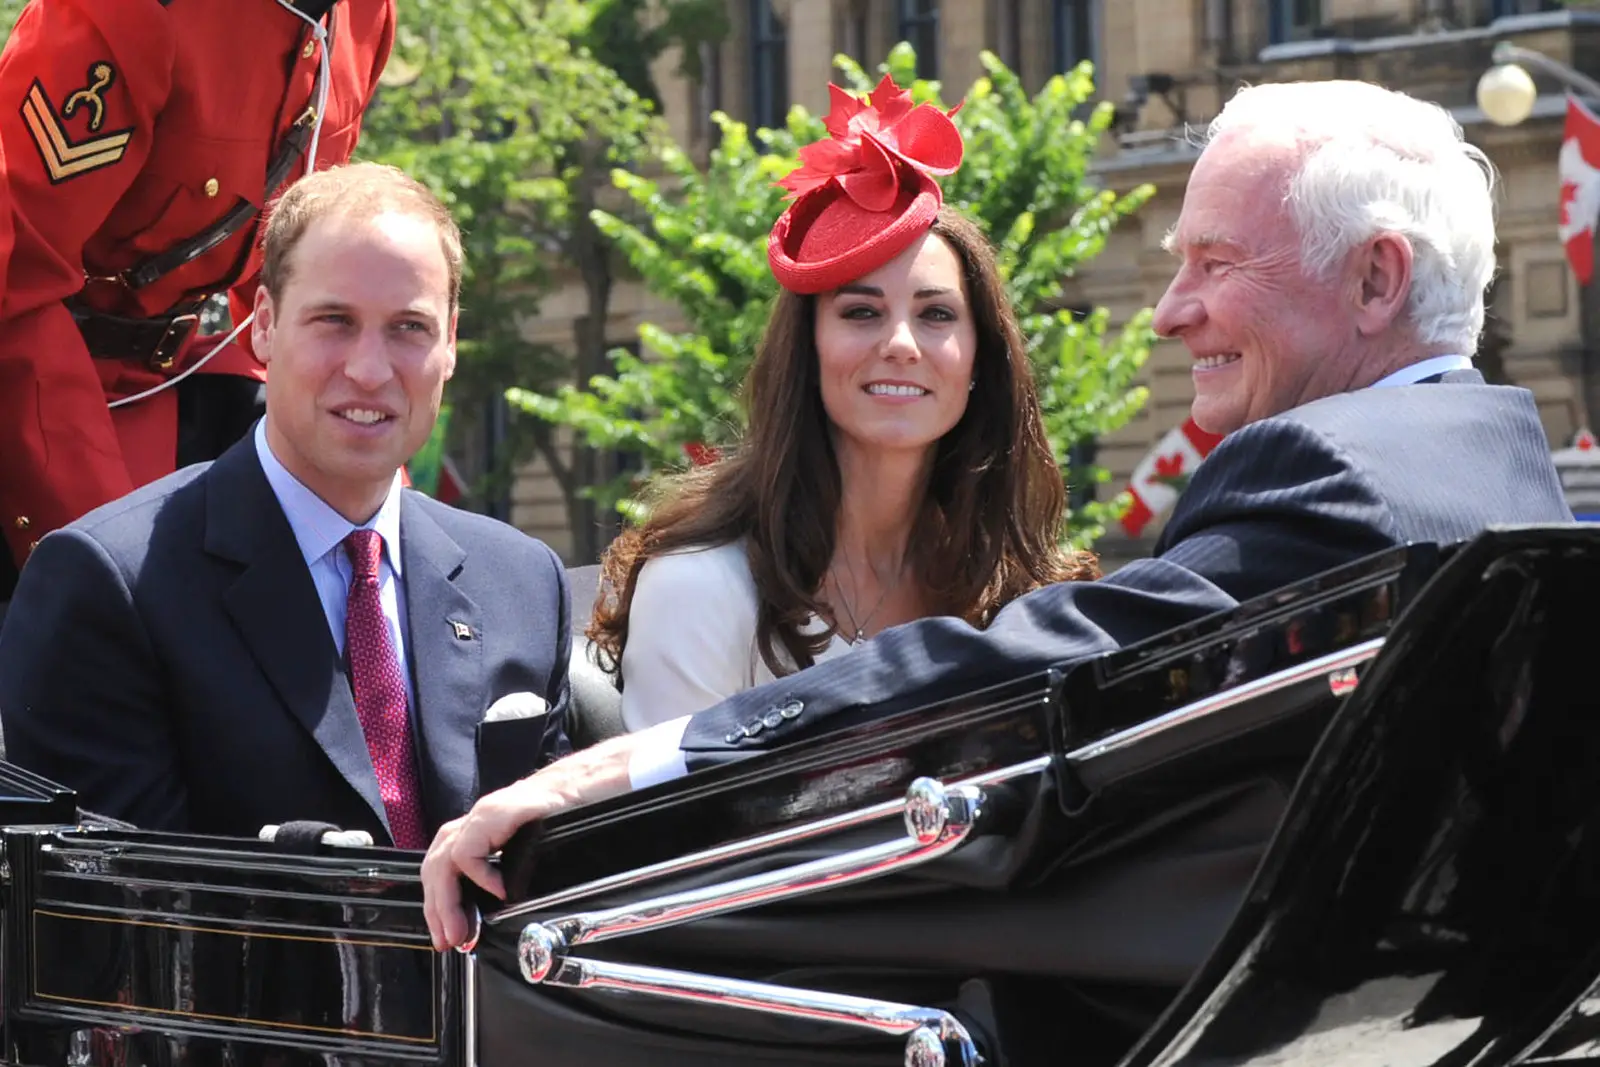 The Duke and Duchess of Cambridge attended Noon show on Canada day during royal tour in 2011